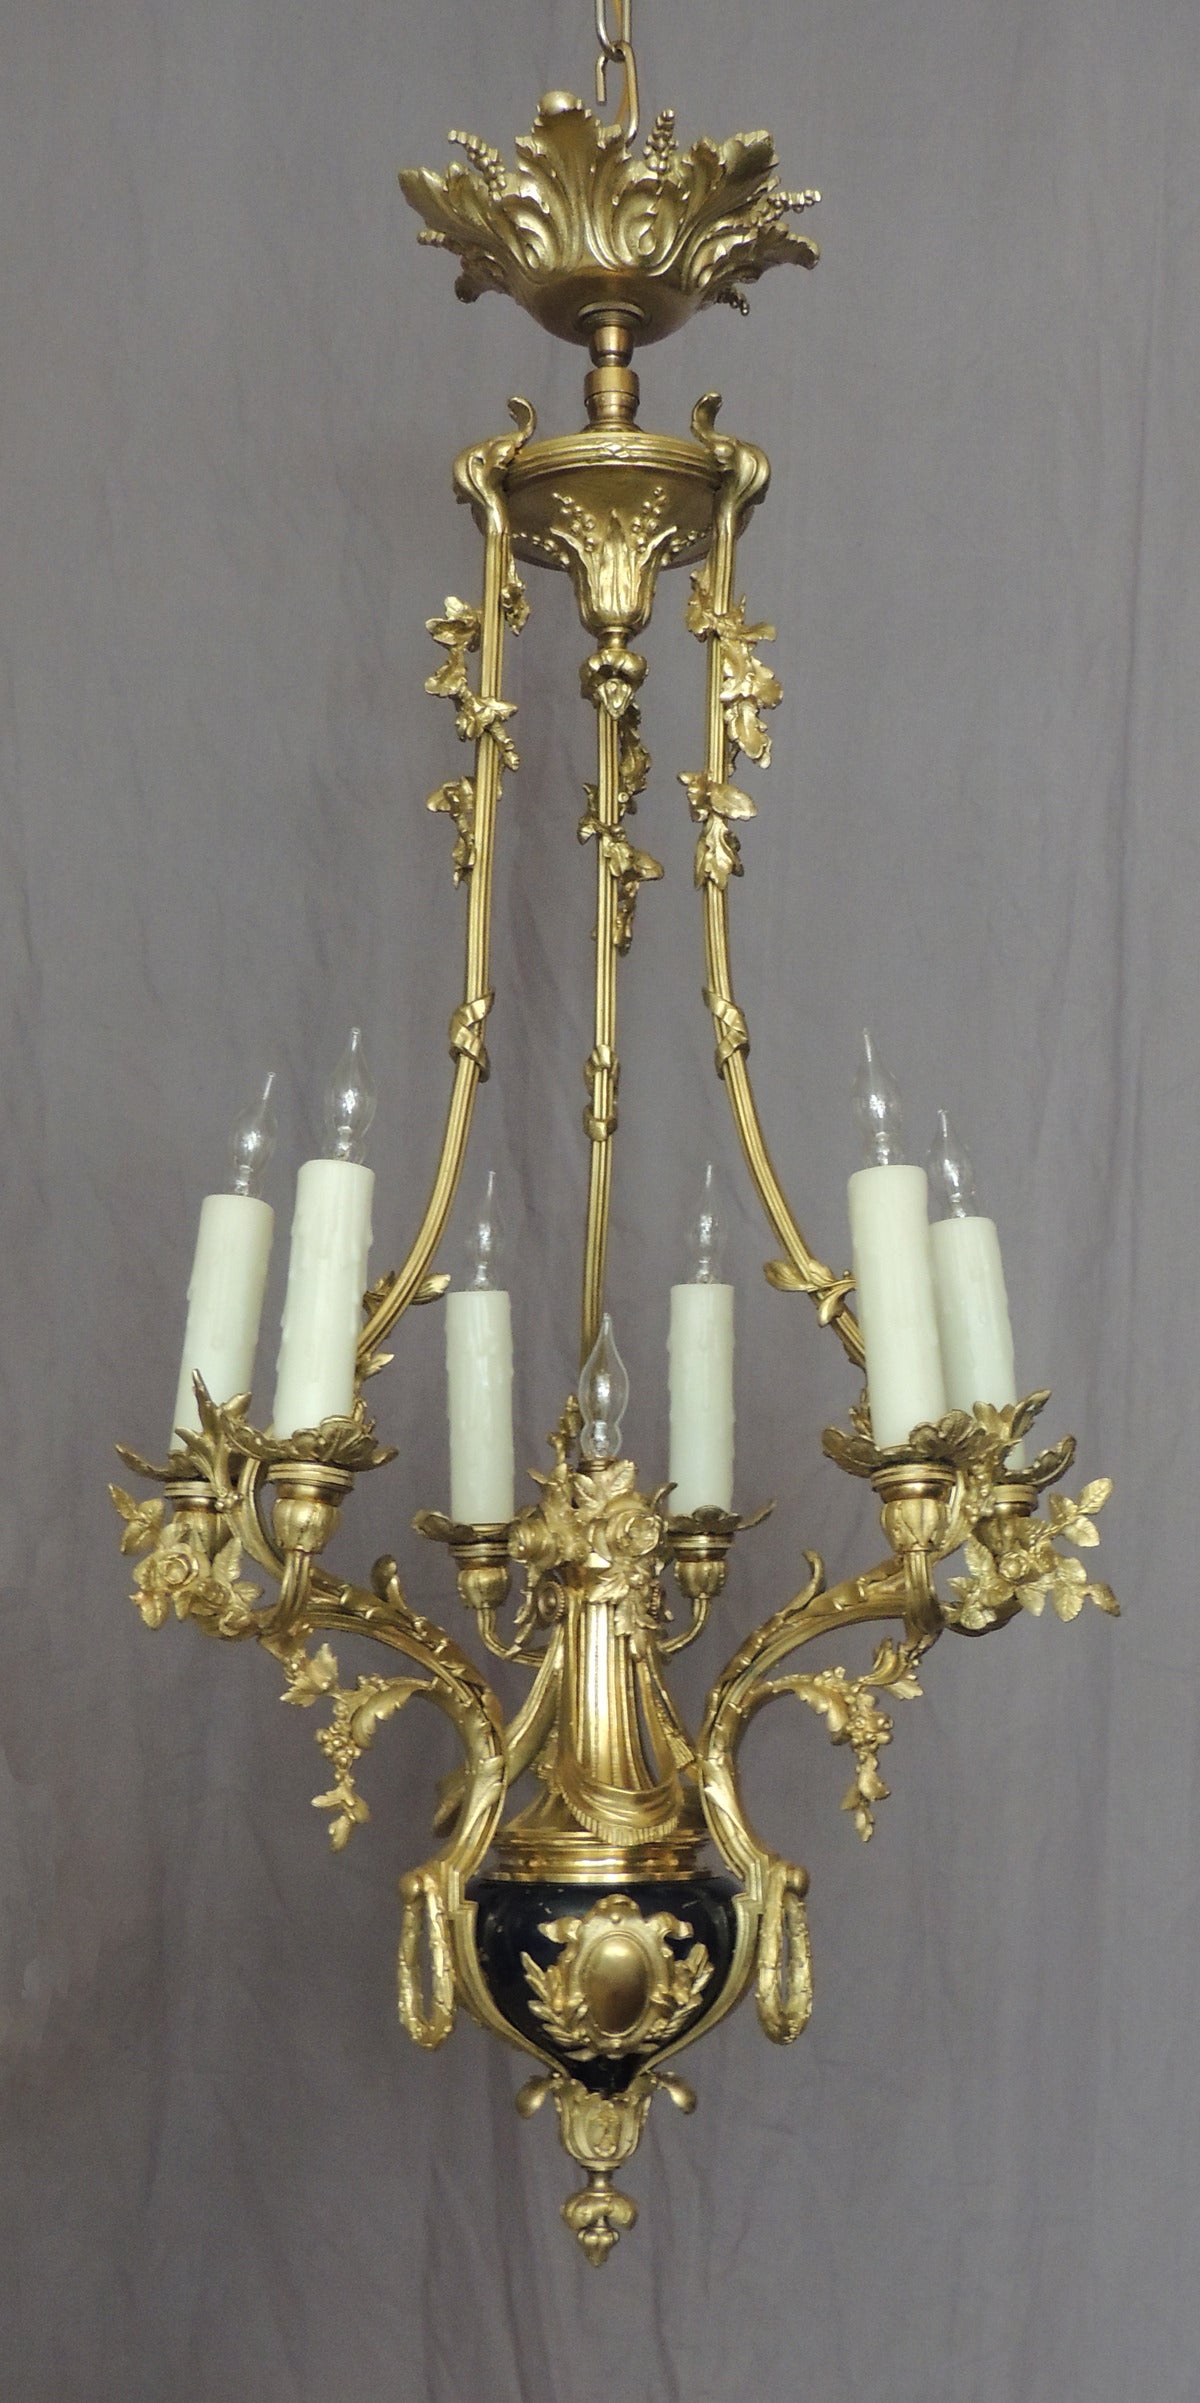 These four bronze chandeliers were made in France in the early-20th century, 
circa 1900, and are bronze doré with cobalt-blue bases and seven lights each.  The casting on these chandeliers displays foliate and floral motifs and are excellent